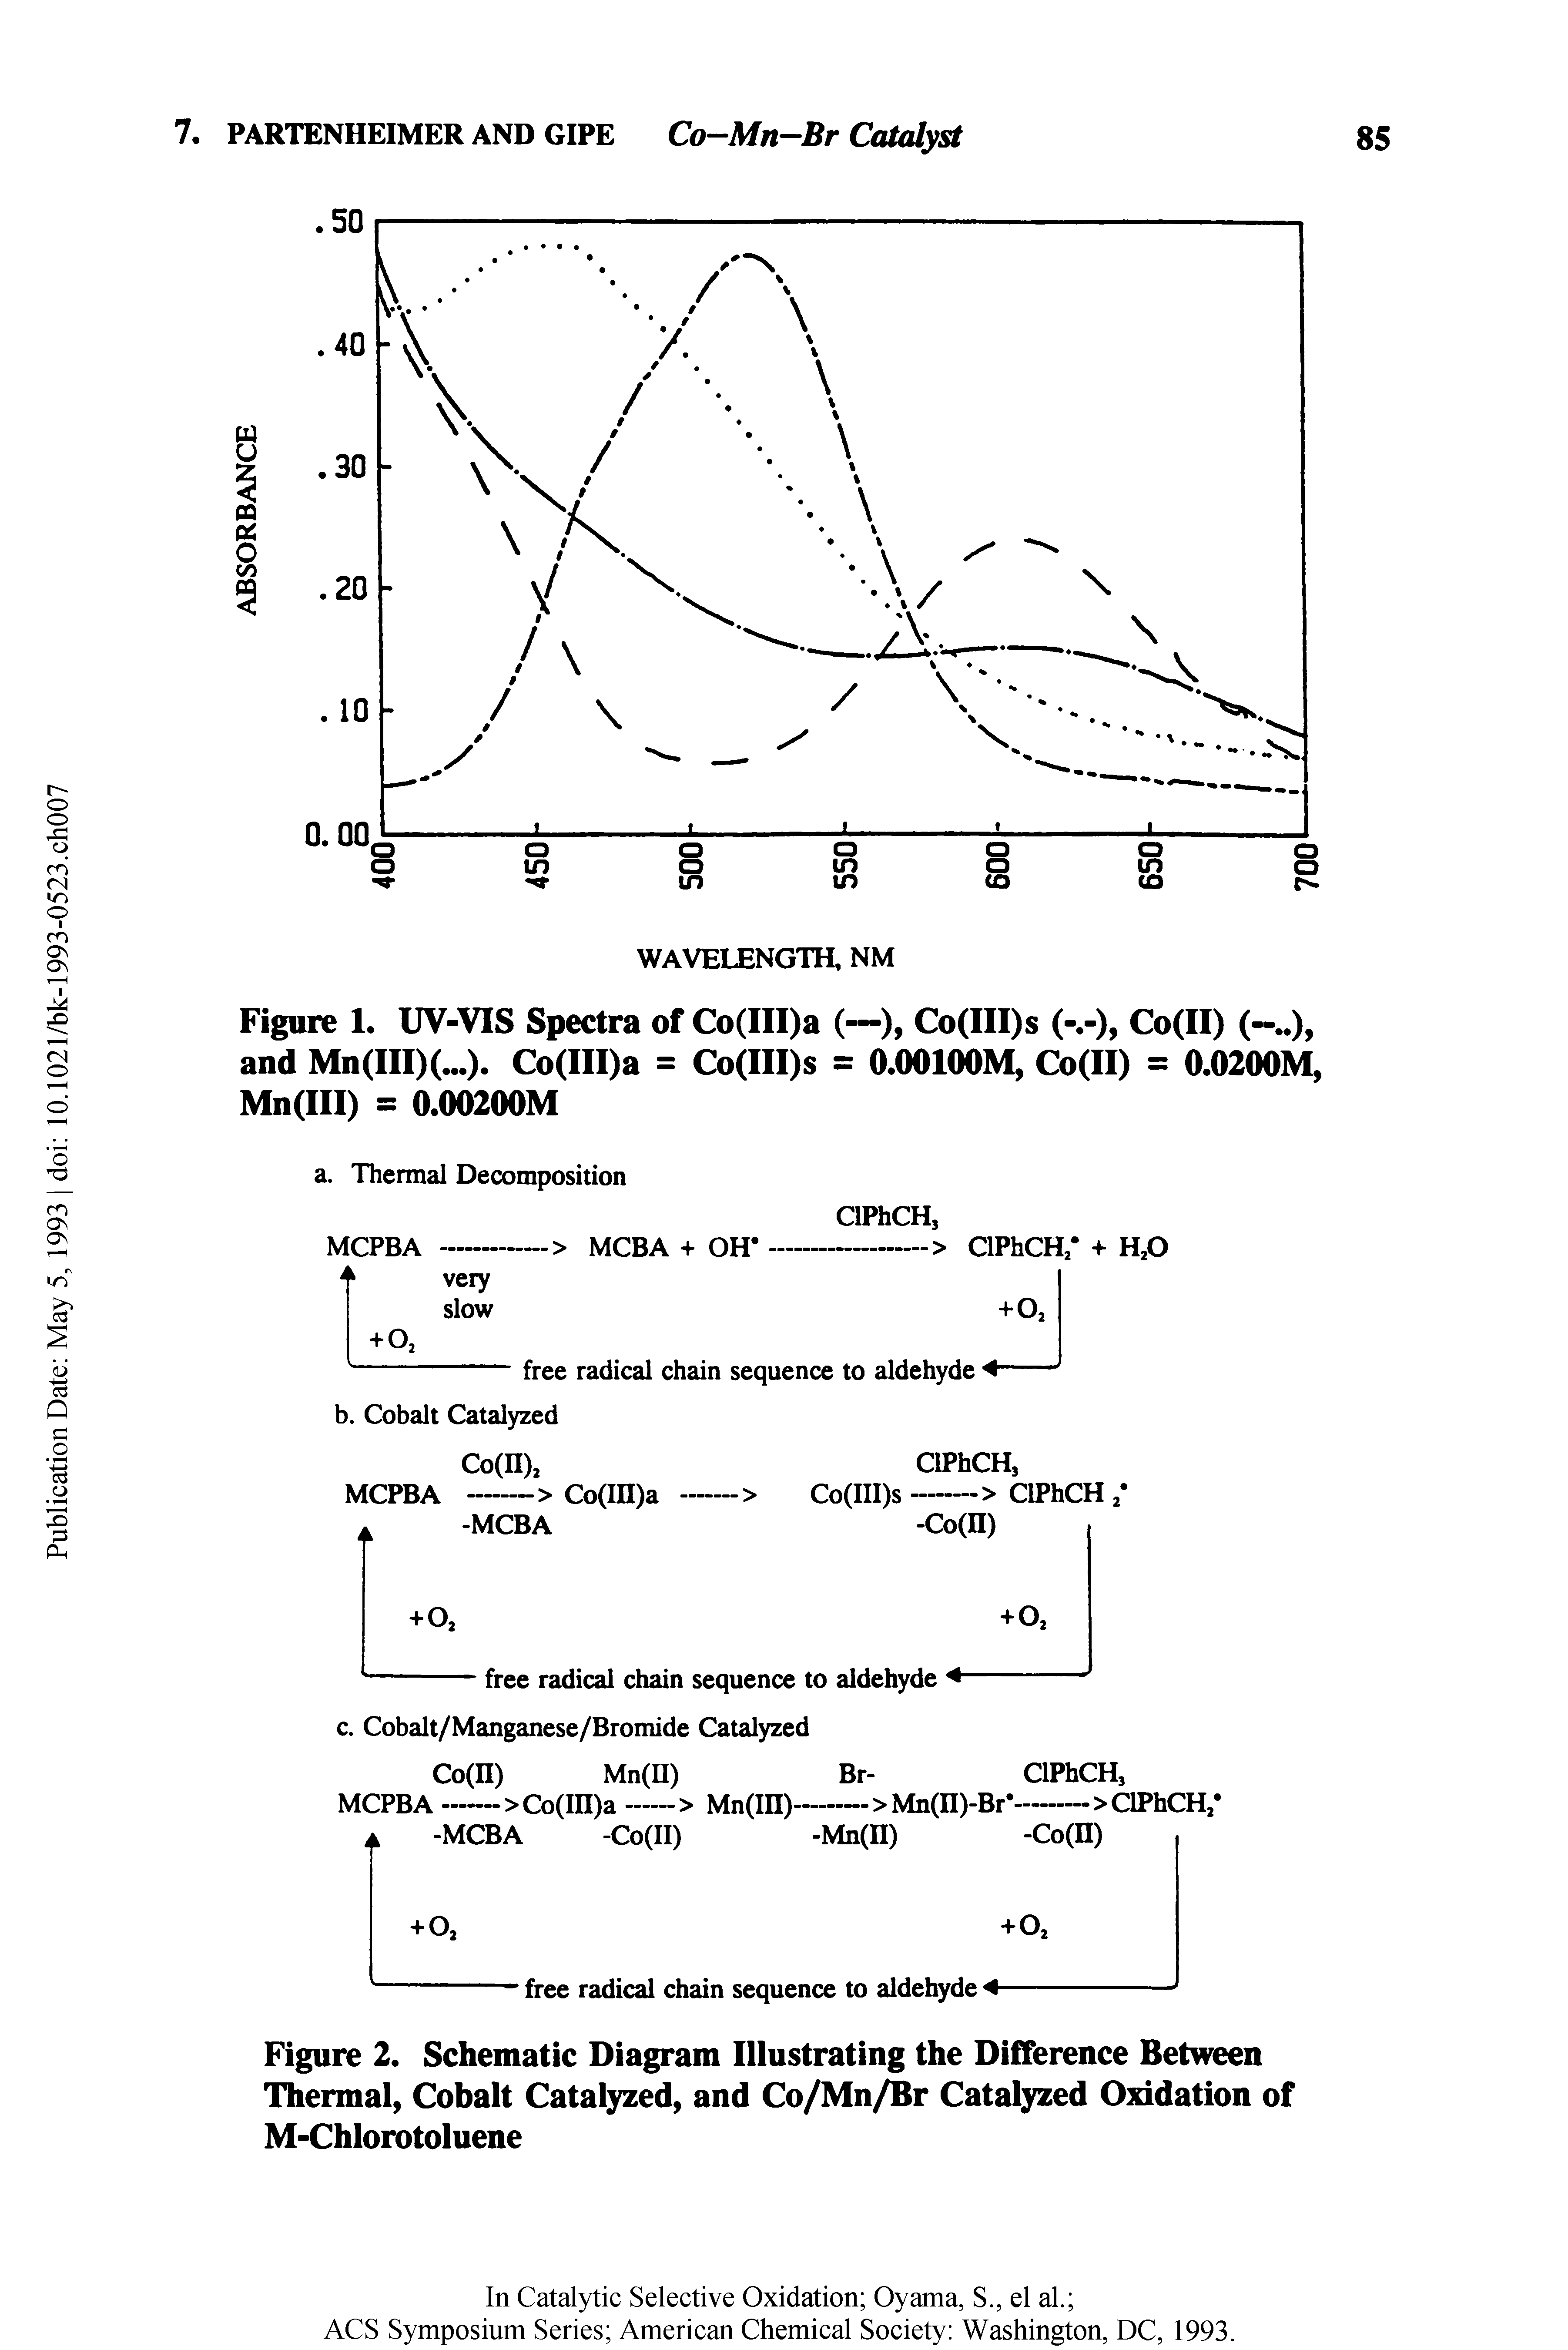 Figure 2. Schematic Diagram Illustrating the Difference Between Thermal, Cobalt Catalyzed, and Co/Mn/Br Catalyzed Oxidation of M-Chlorotoluene...